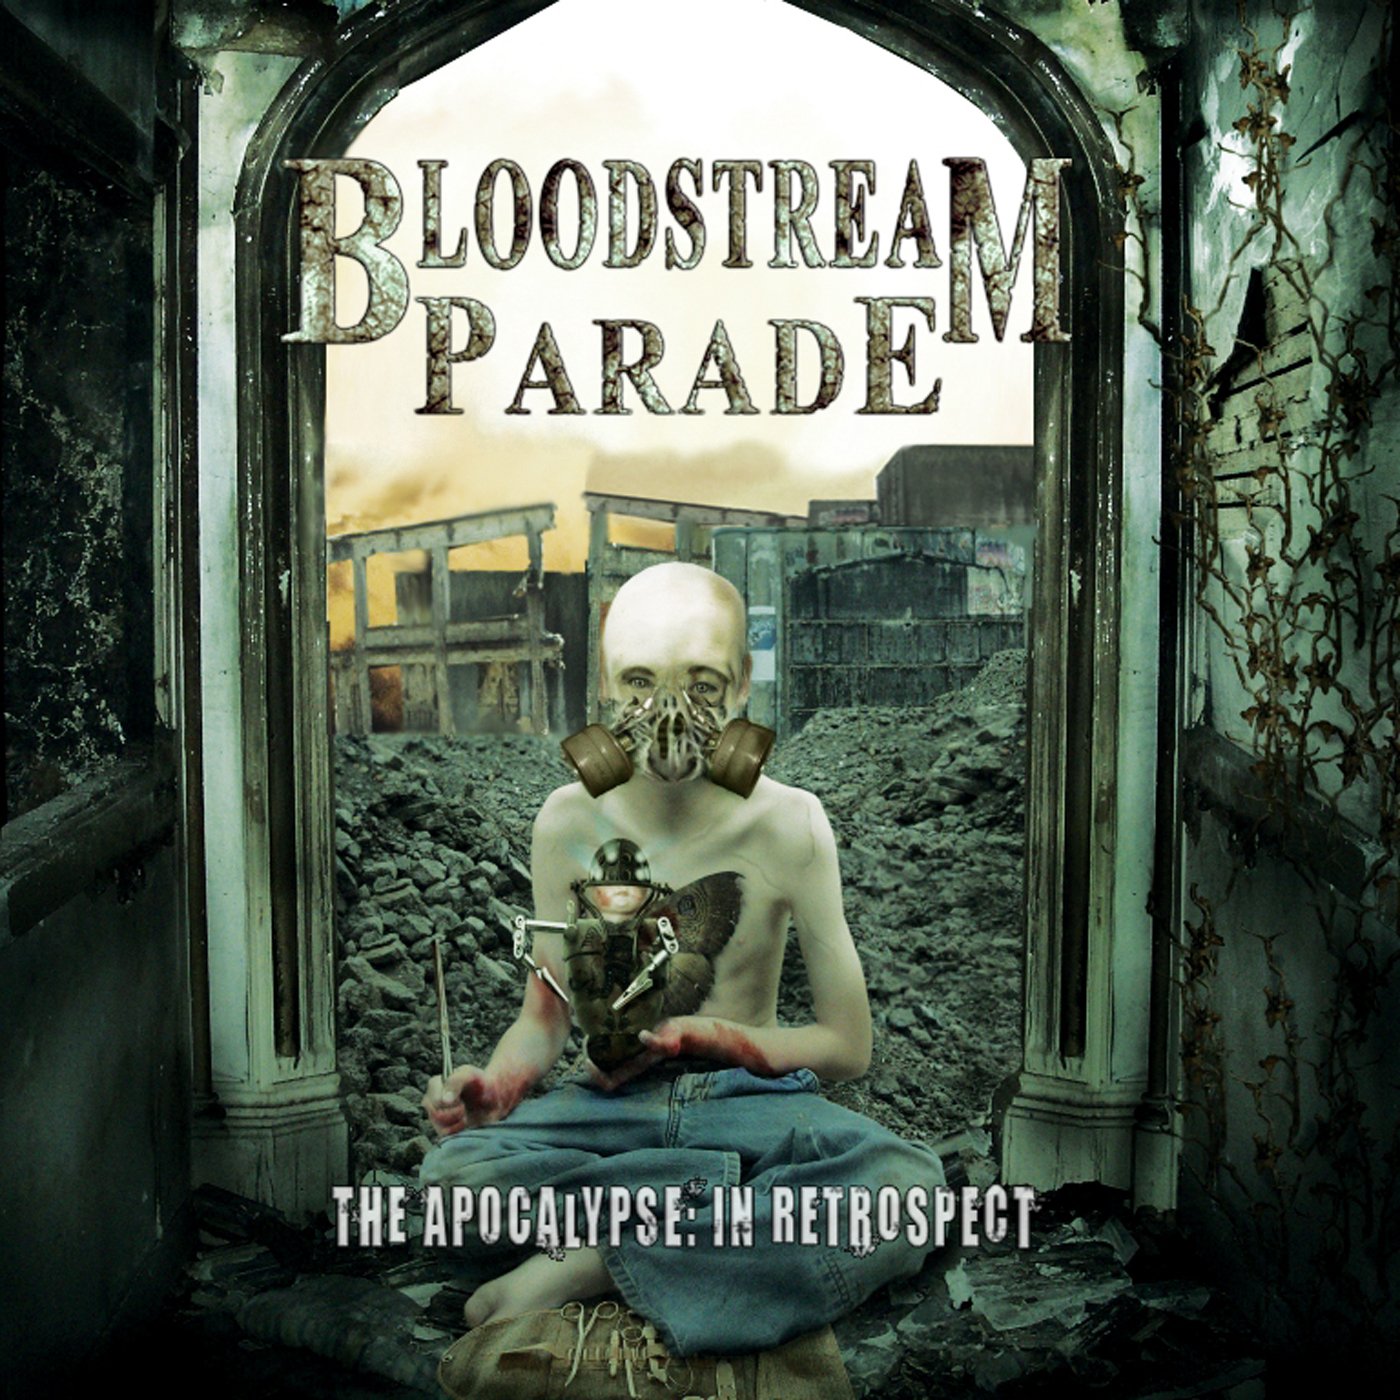 The Apocalypse In Retrospect by Bloodstream Parade